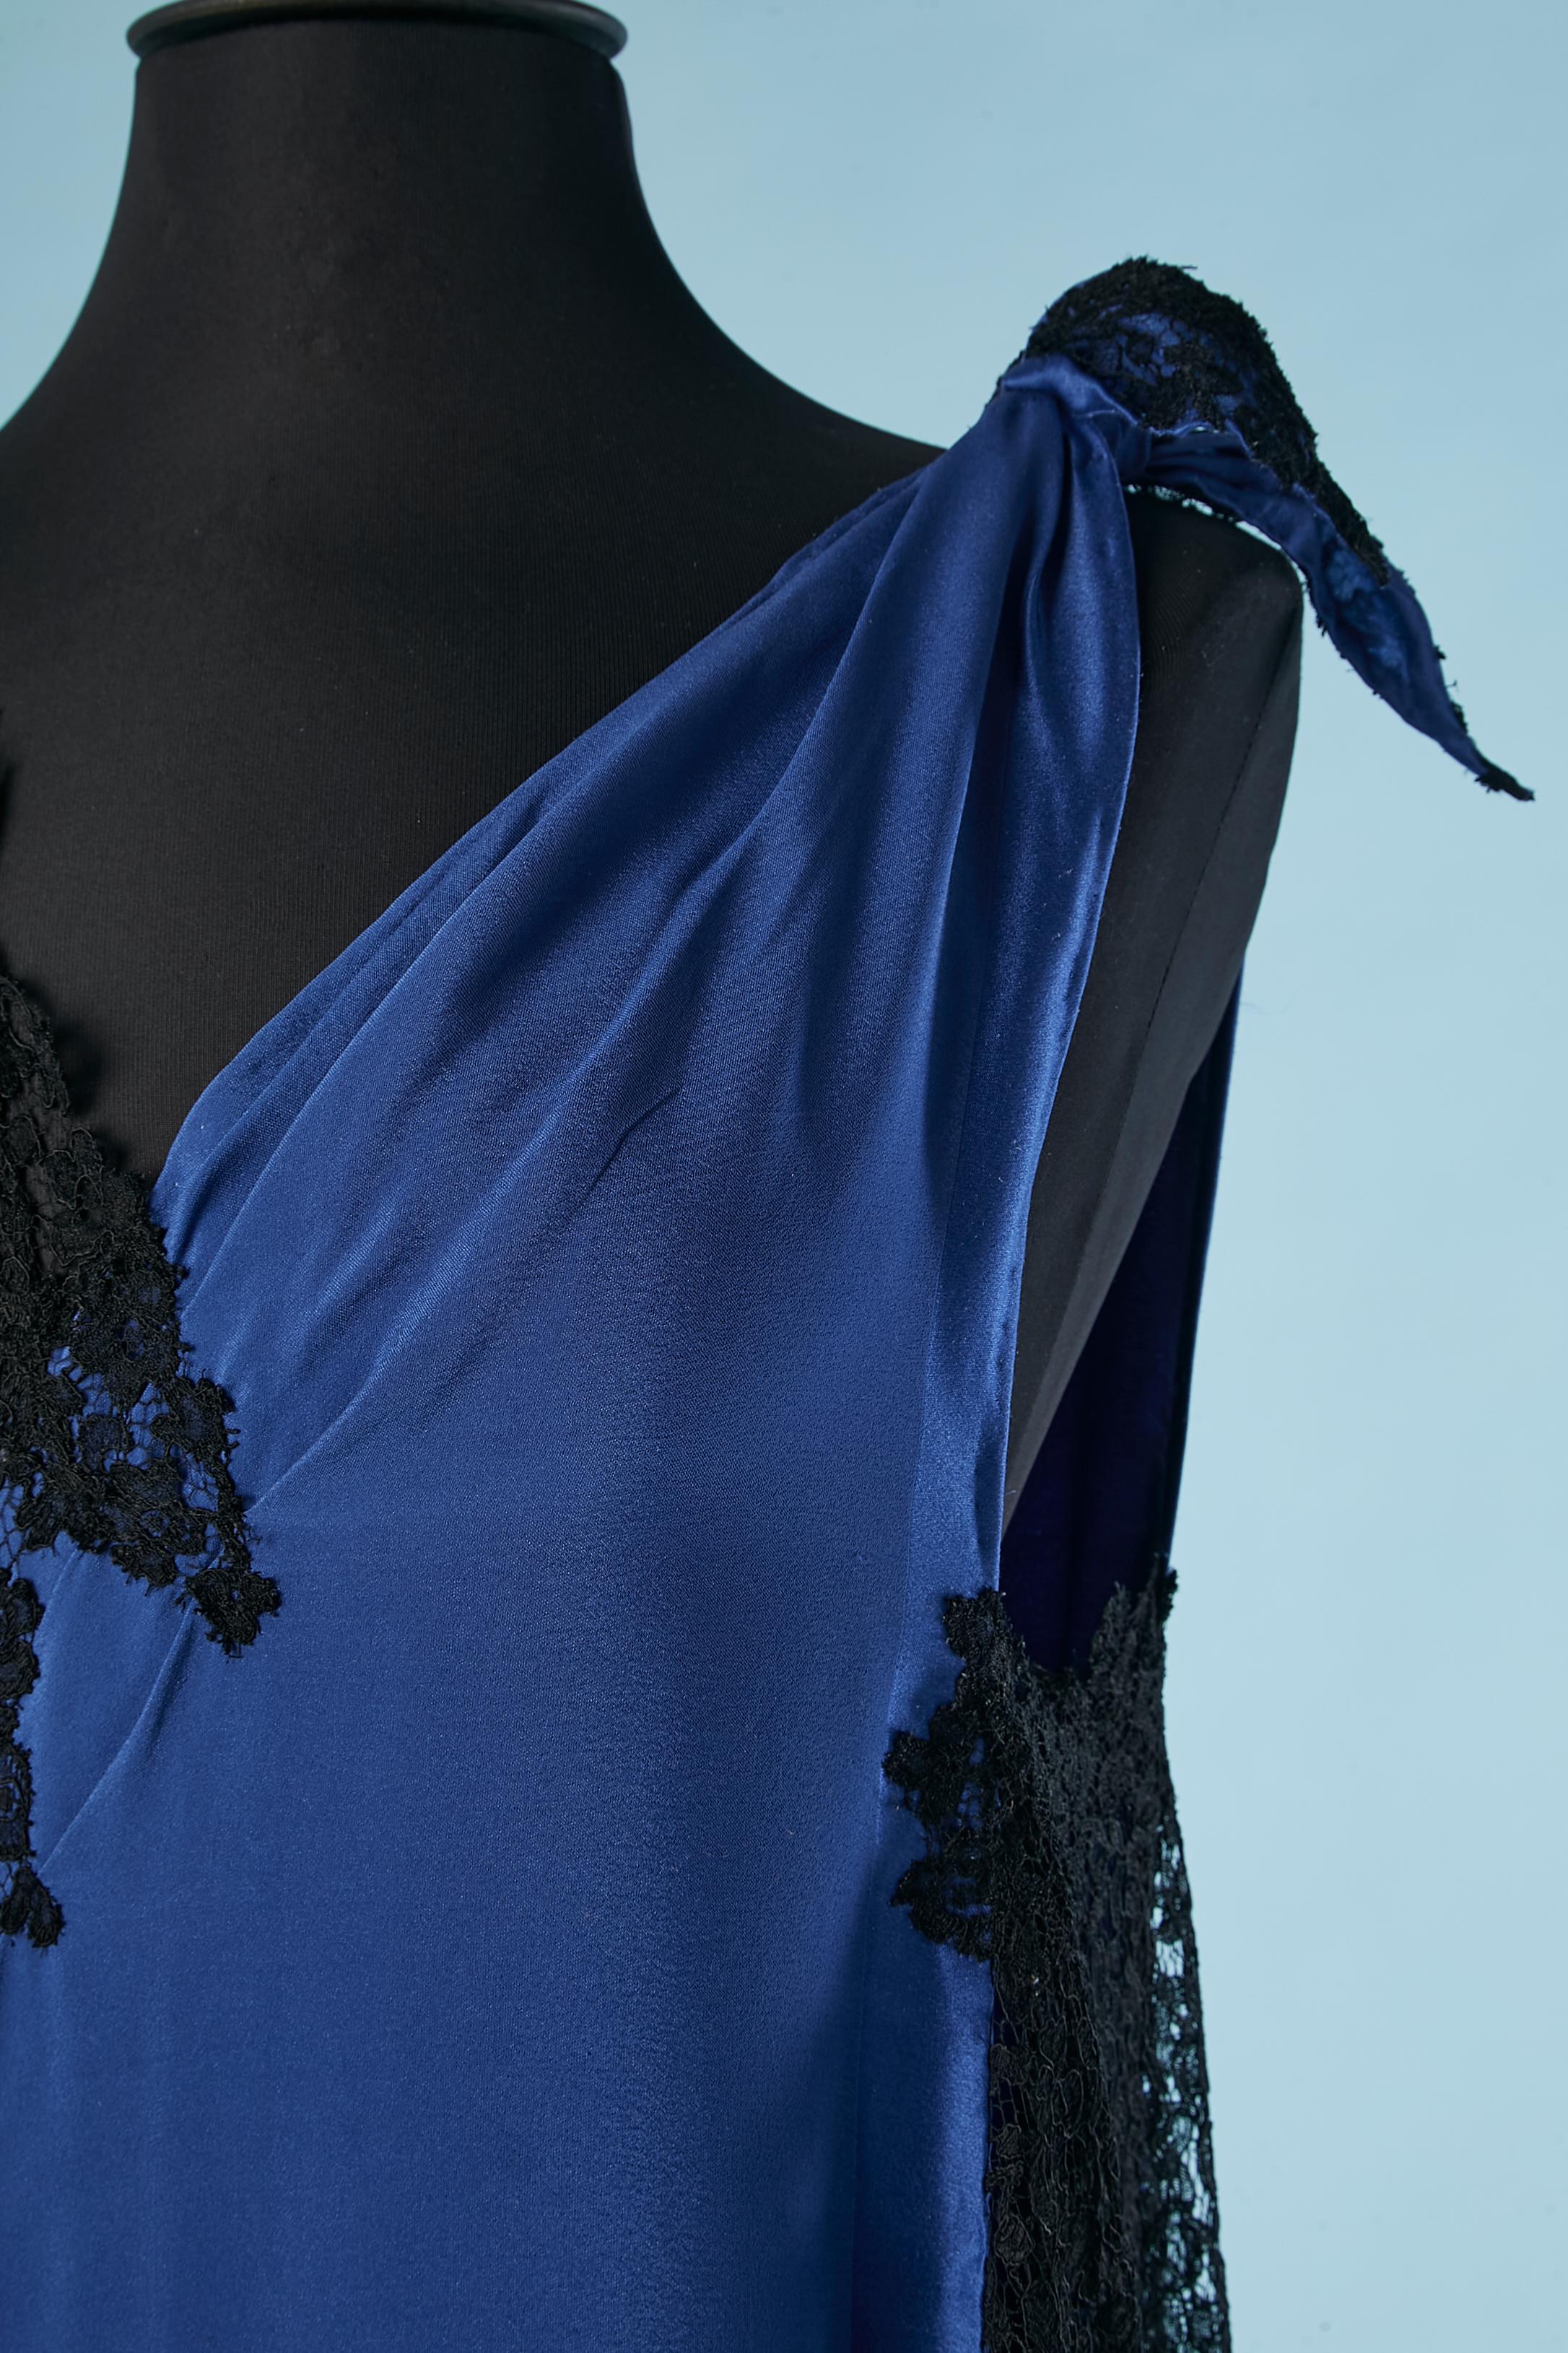 Asymmetrical evening dress in see-through black lace and blue silk jacquard  In Excellent Condition For Sale In Saint-Ouen-Sur-Seine, FR